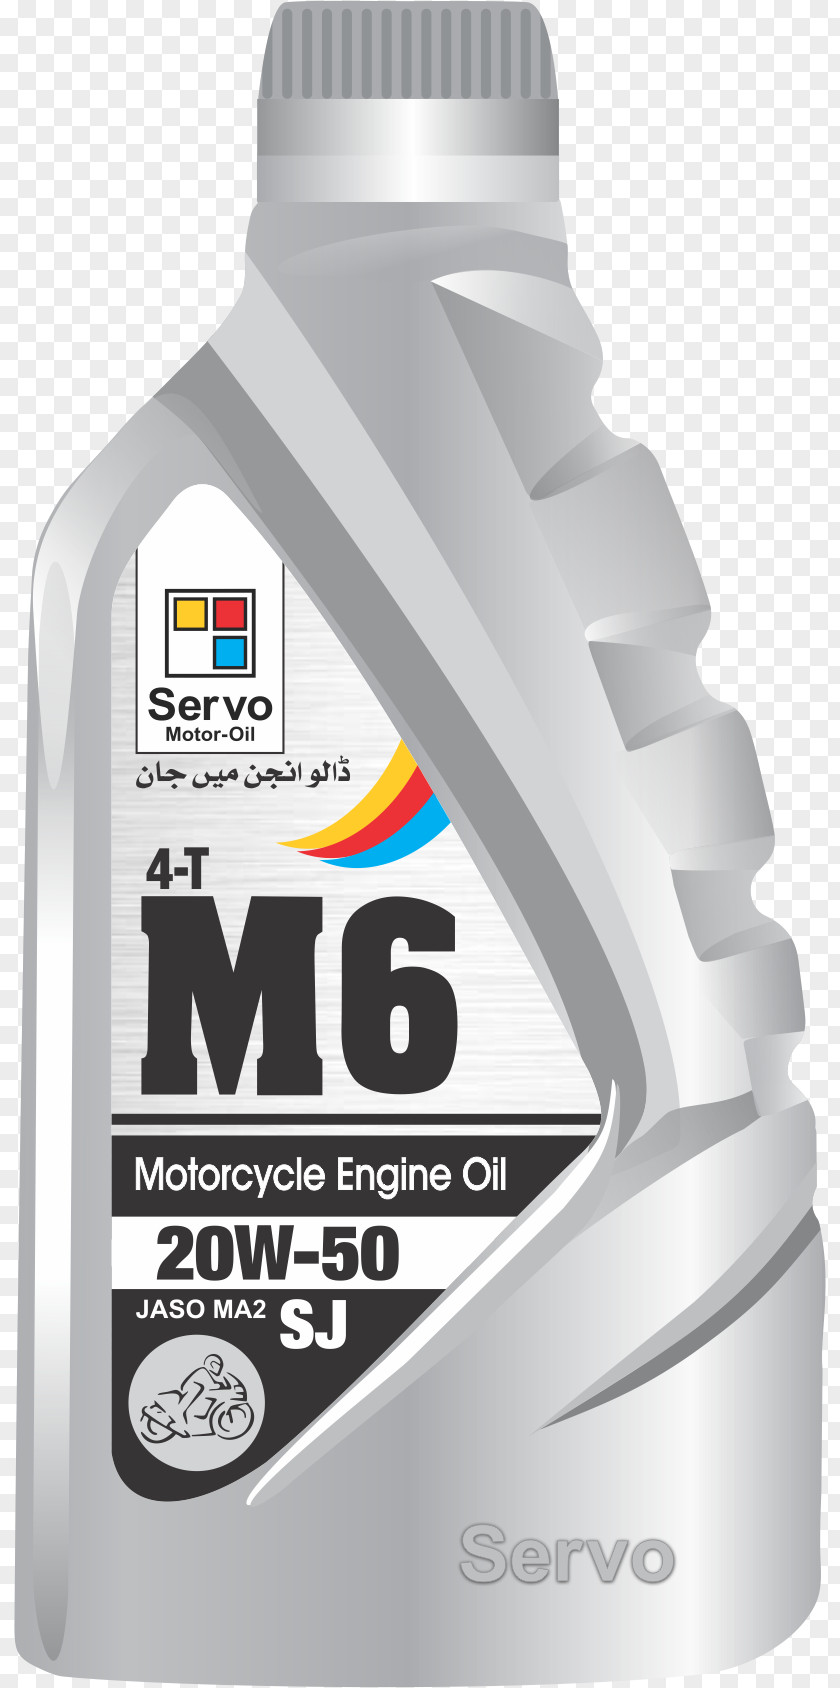 Oil Motor Lubricant Engine Gear PNG